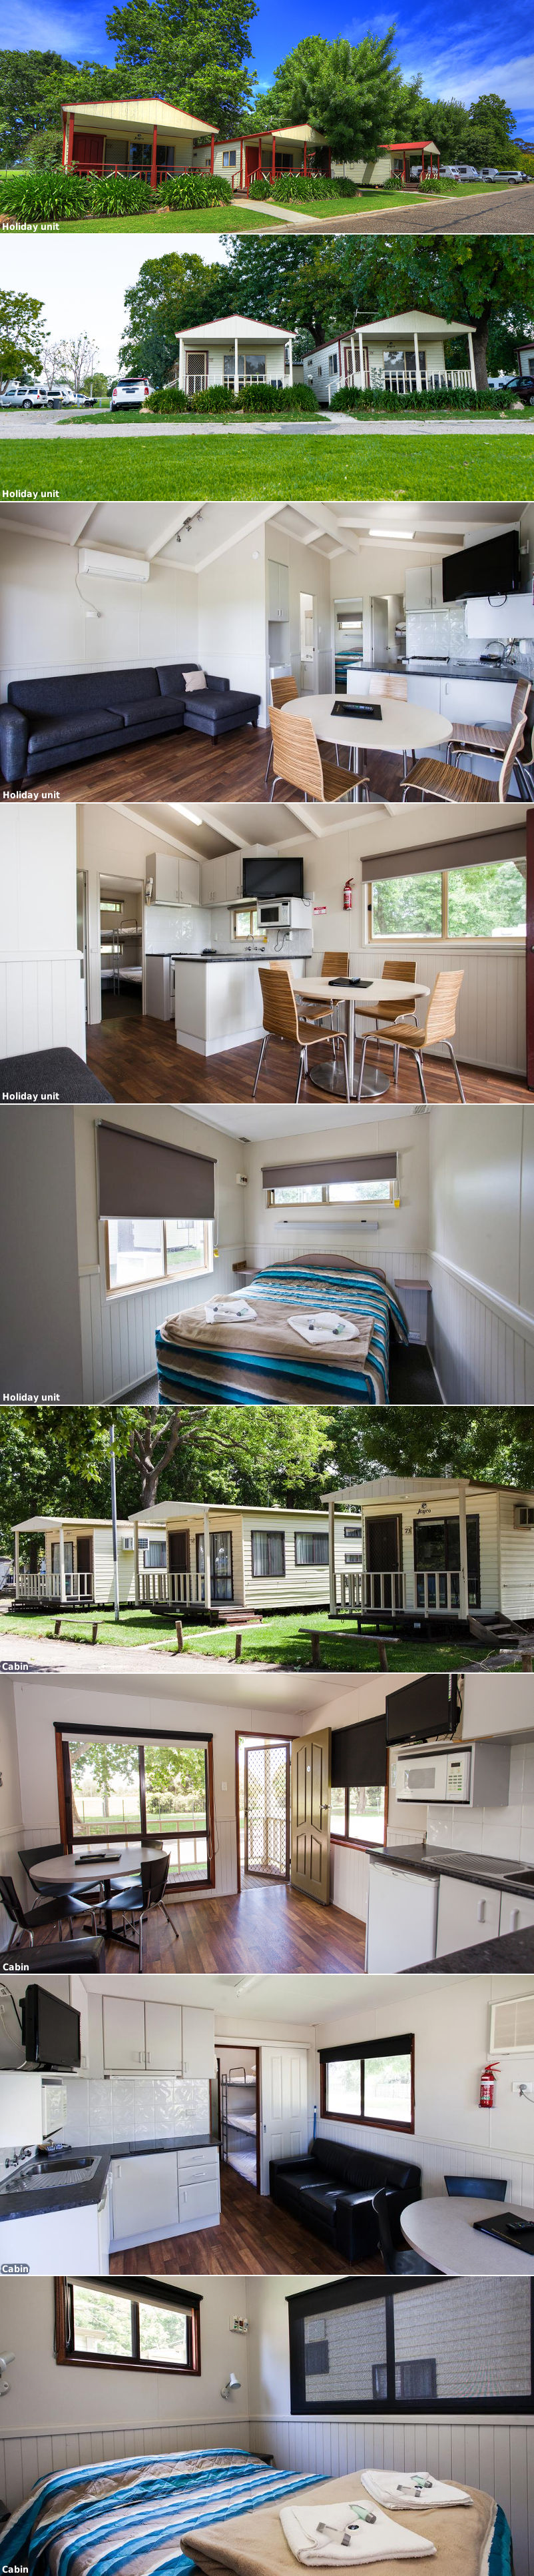 NRMA Bairnsdale Riverside Holiday Park - Holiday units and cabins